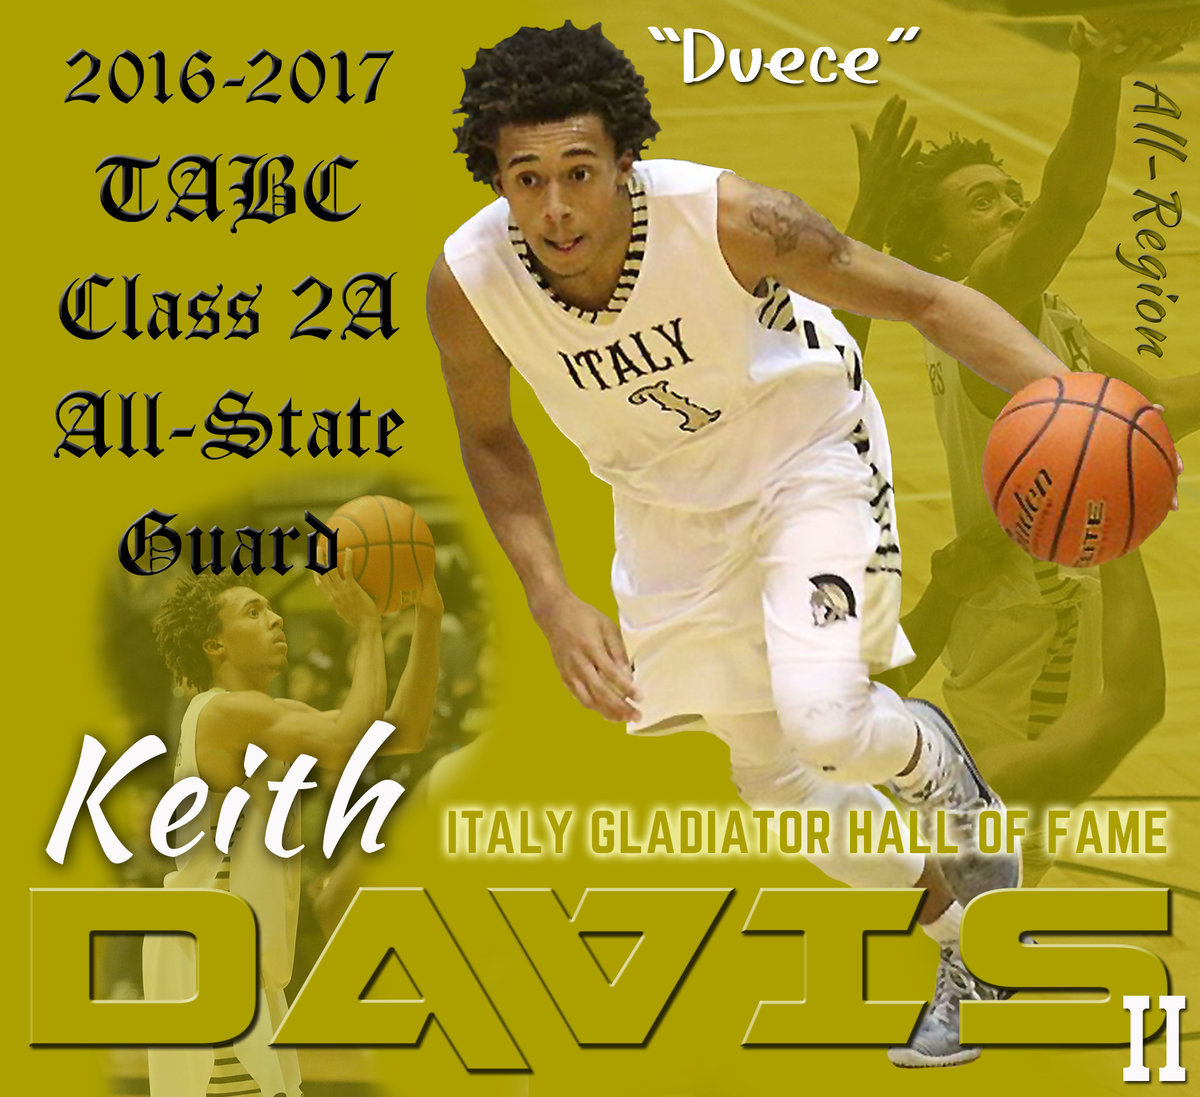 Image: Keith Davis II joins elite list of Italy Gladiator All-State basketball players as he now resides with his father, Keith Davis (All-State 1997), in the Italy Gladiator Basketball Hall of Fame. Davis II also earned 2016-2017 TABC Class 2A All-Region honors as well.